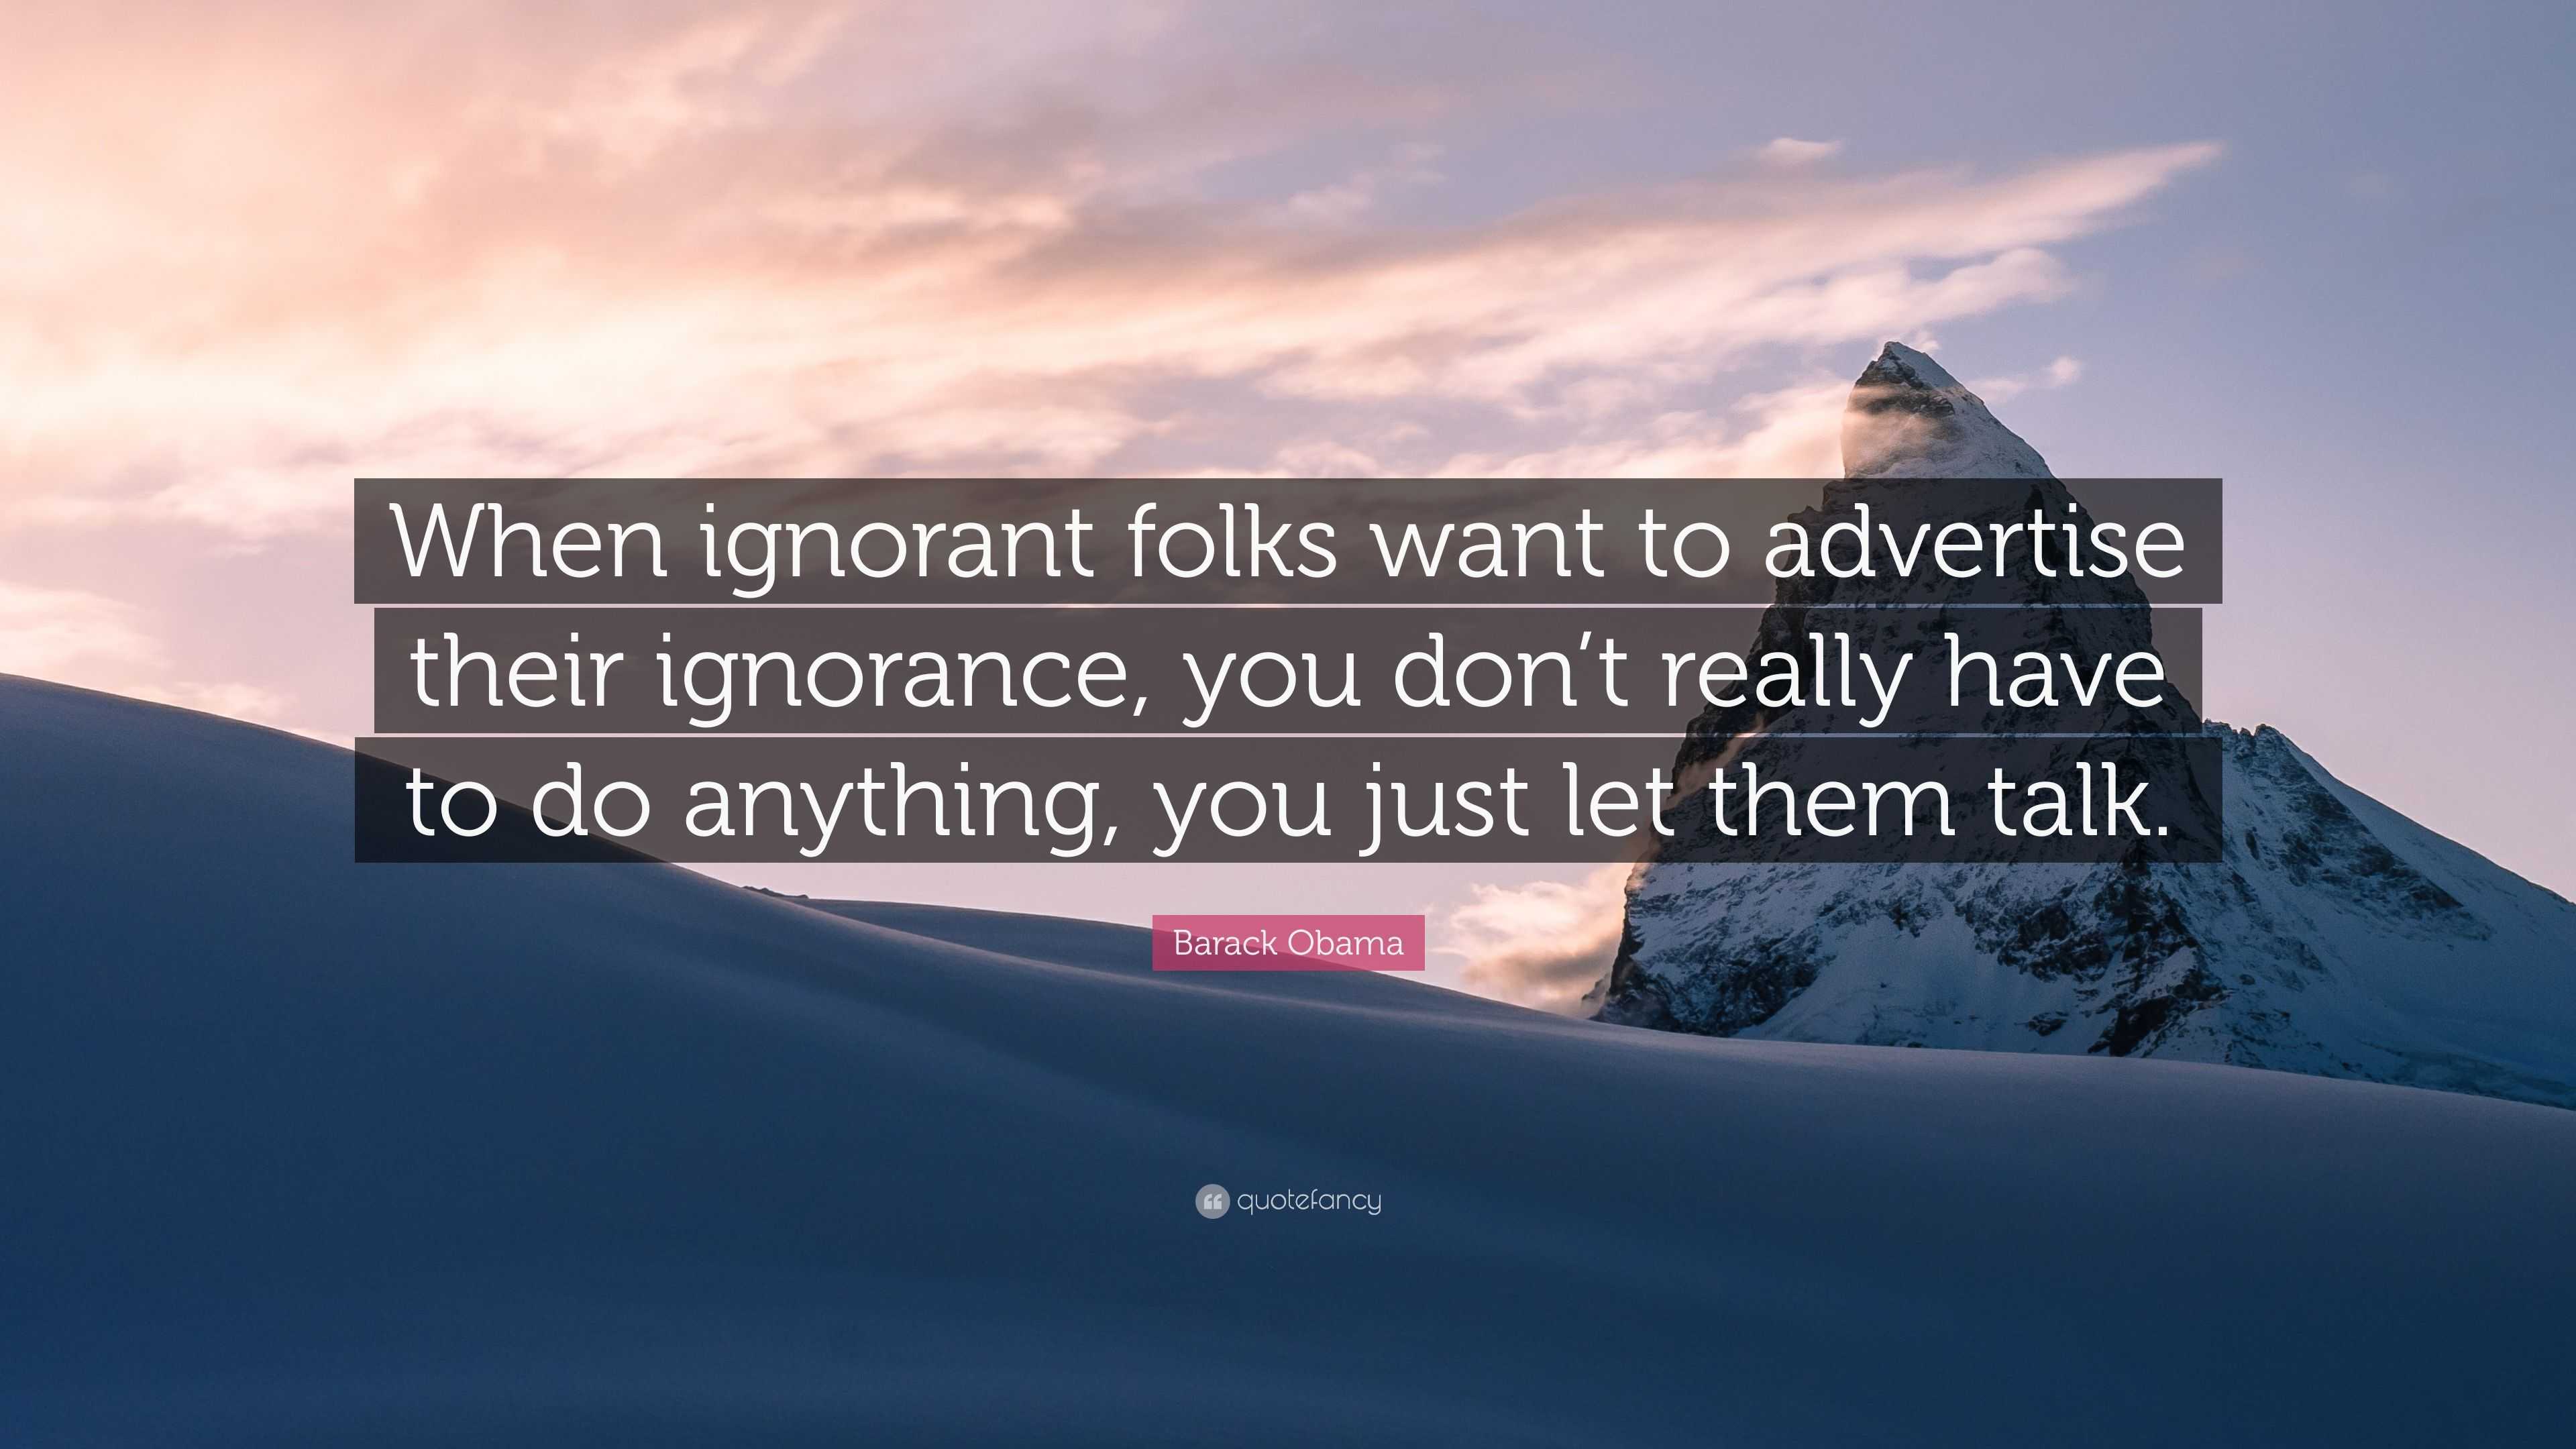 Barack Obama Quote: “When ignorant folks want to advertise their